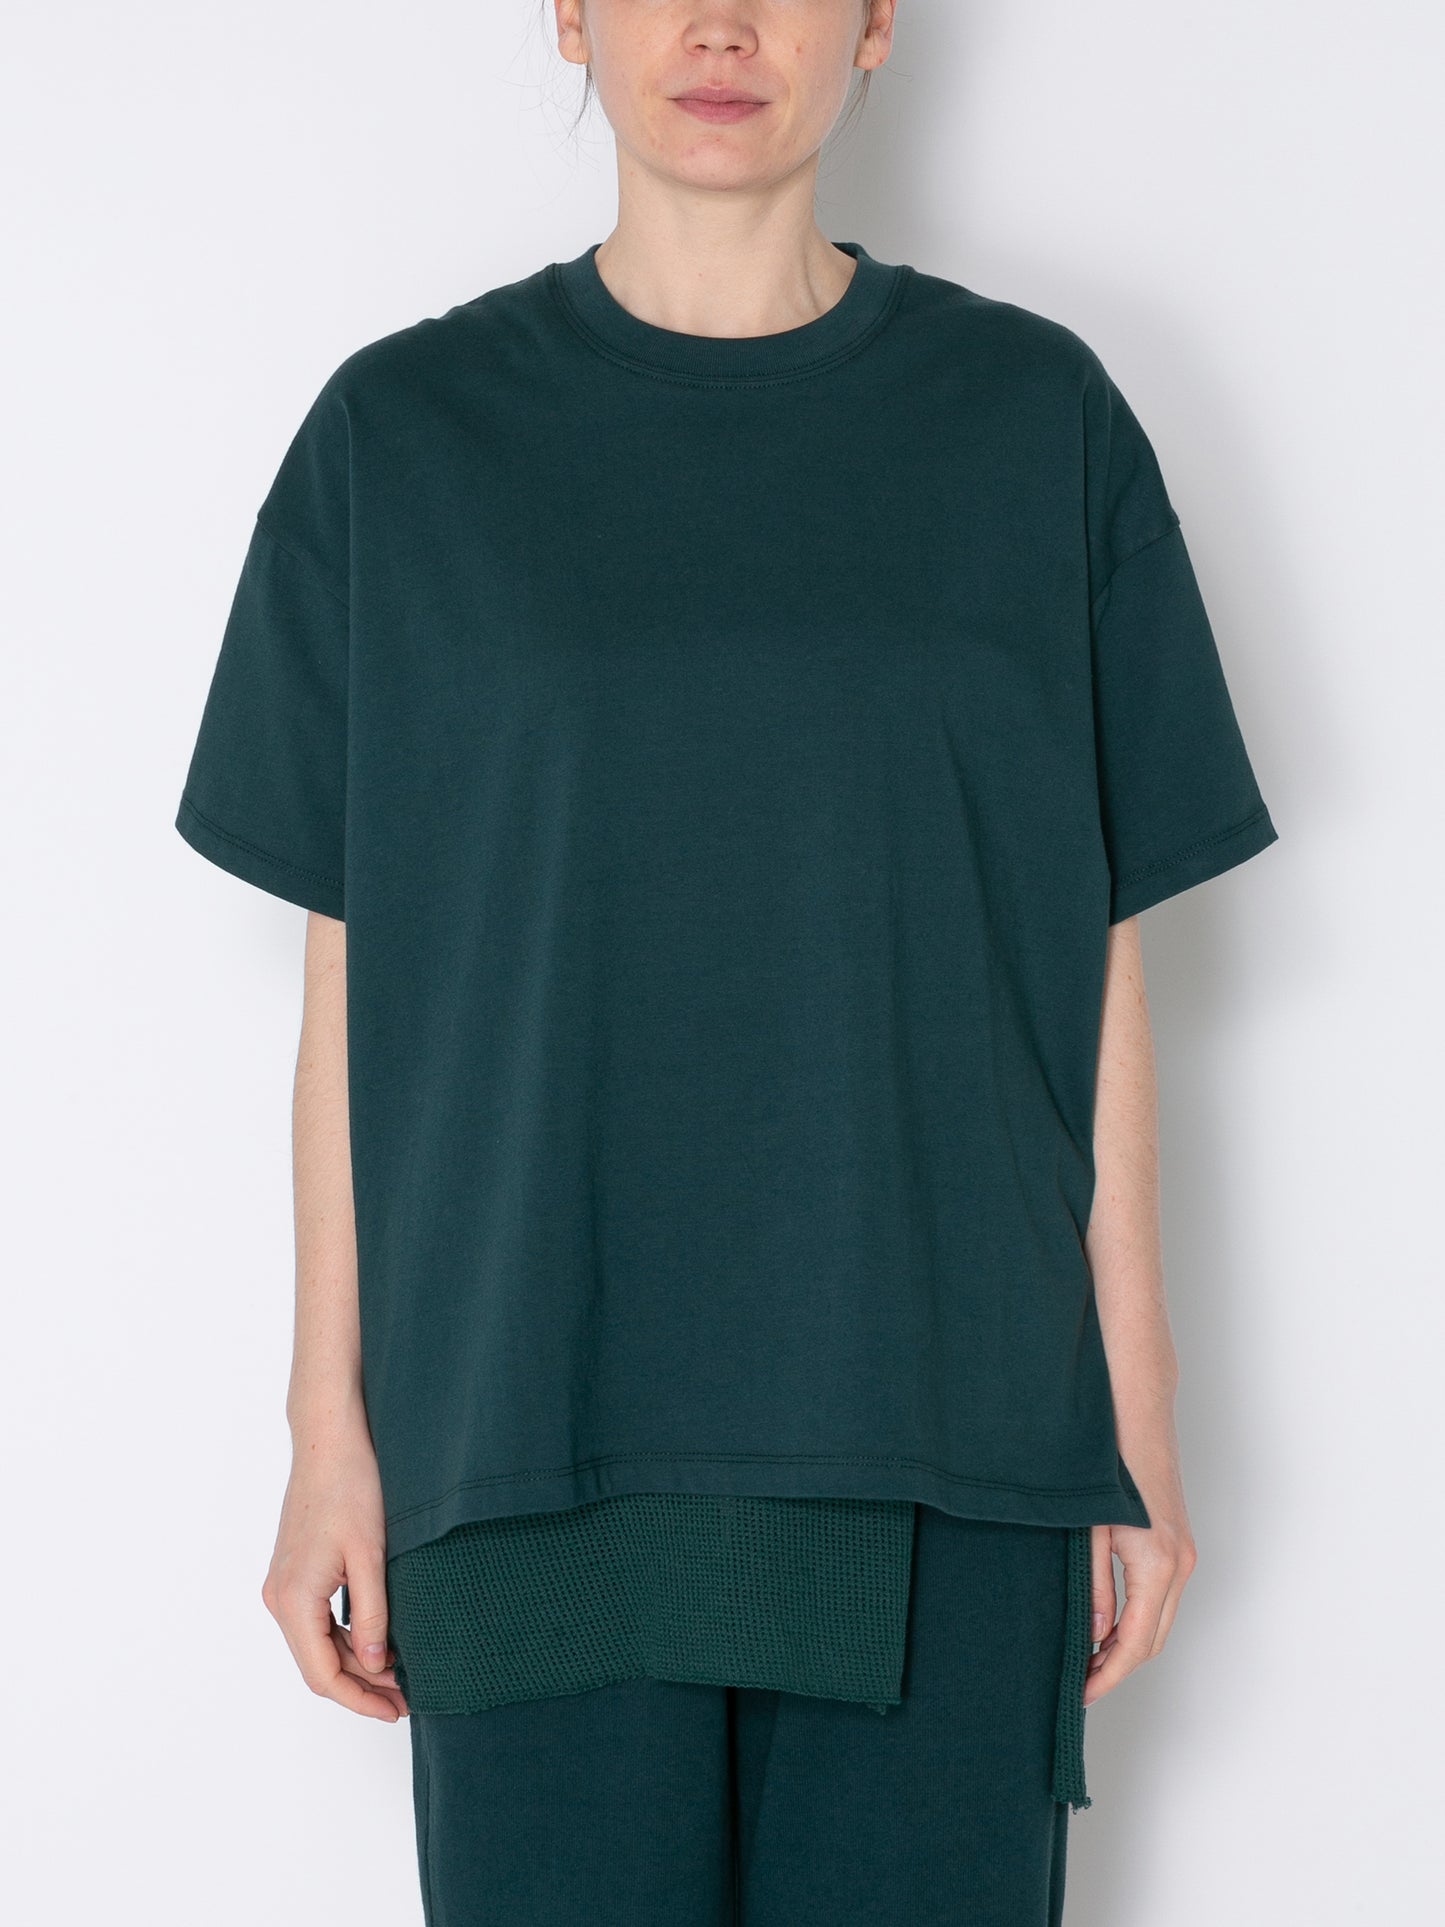 BAGGY S/S TEE ORGANIC COTTON JERSEY AM-C0004 Forest